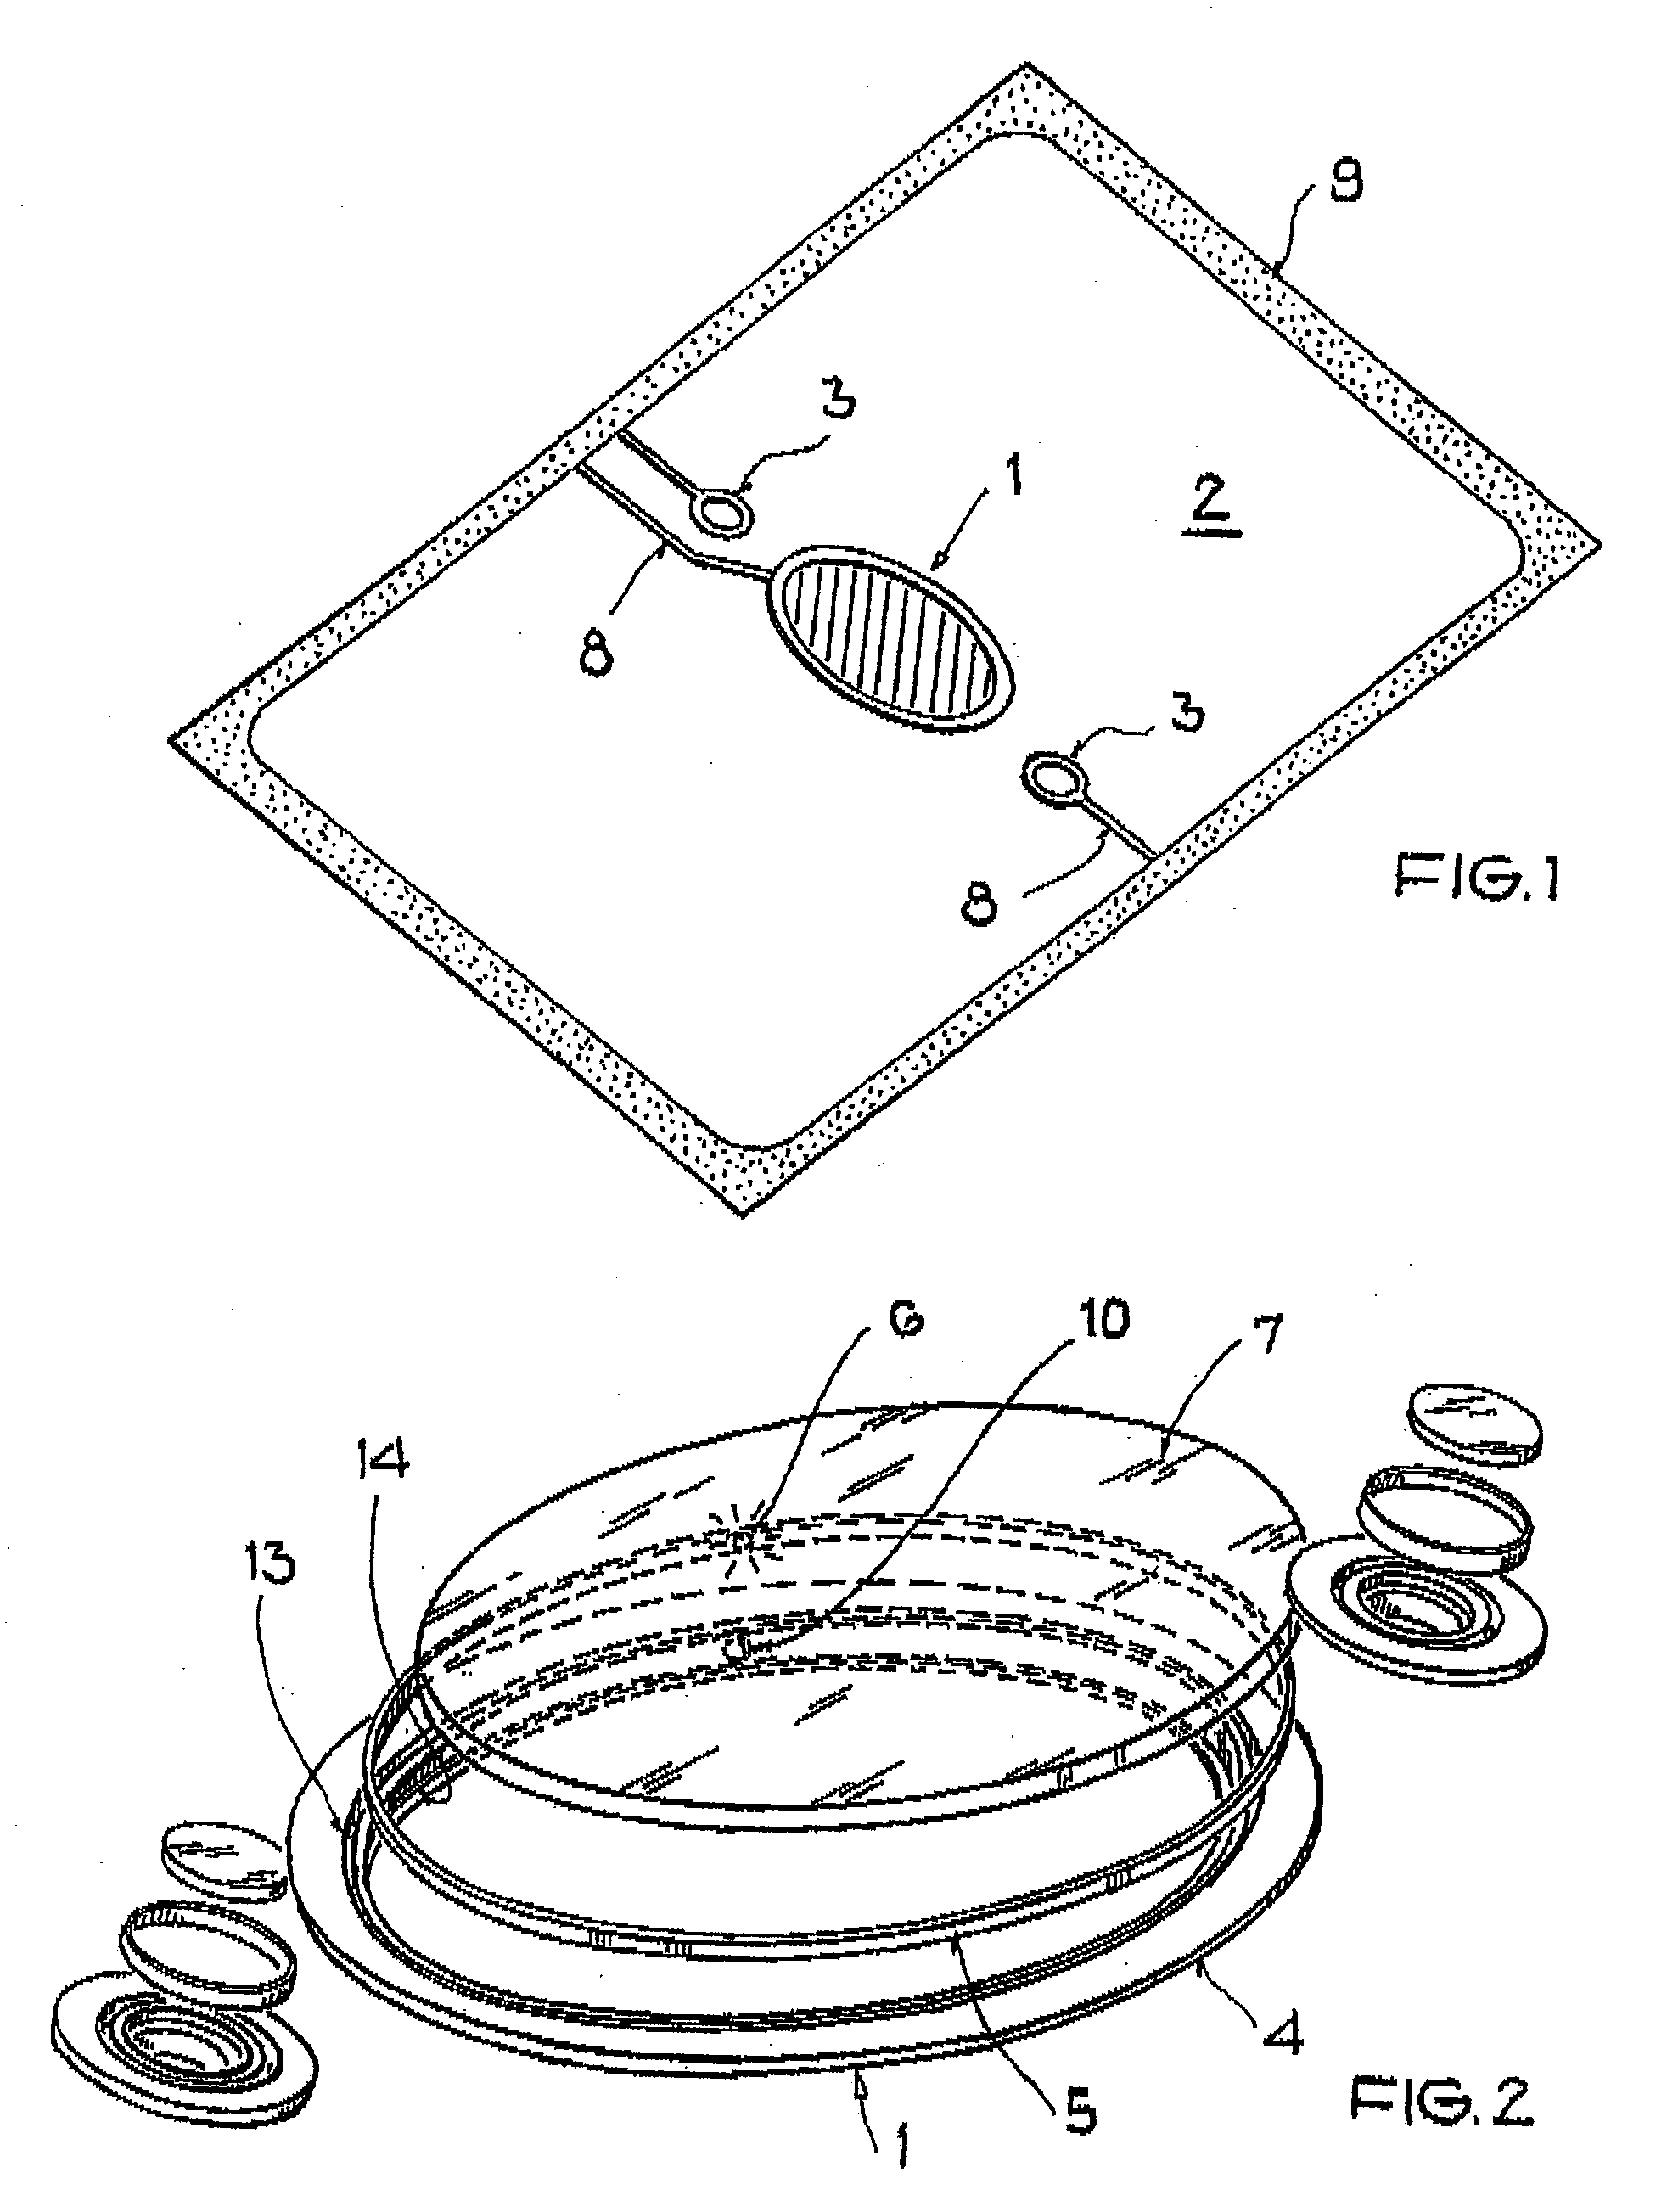 Light for the Passenger Compartment of a Motor Vehicle